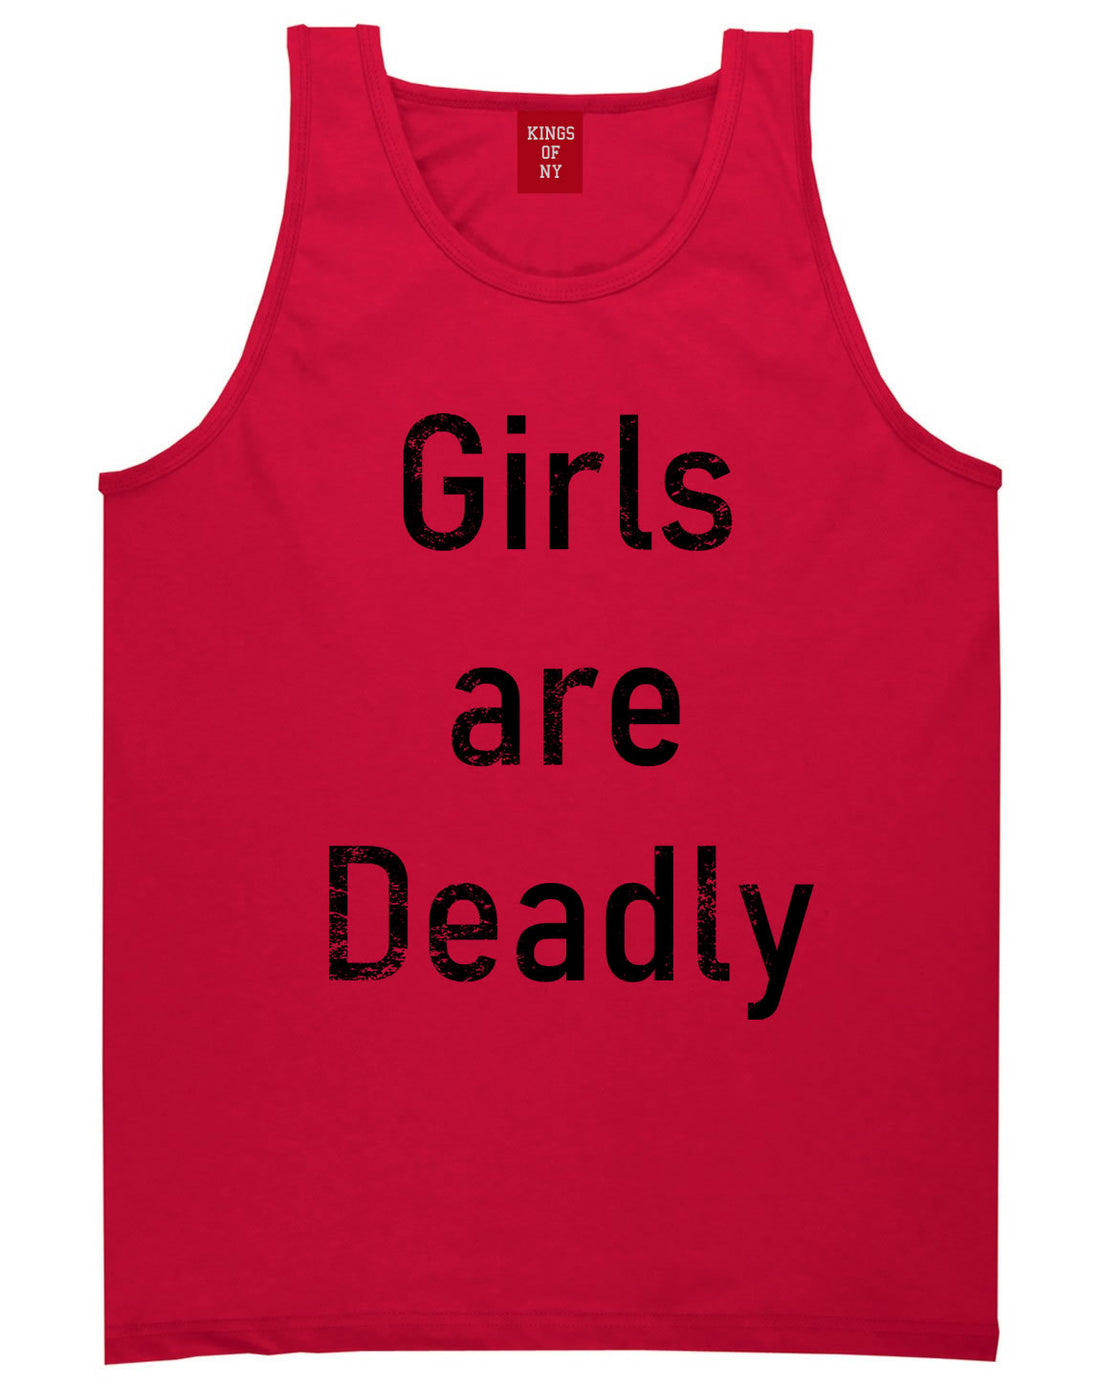 Girls Are Deadly Mens Tank Top Shirt Red By Kings Of NY